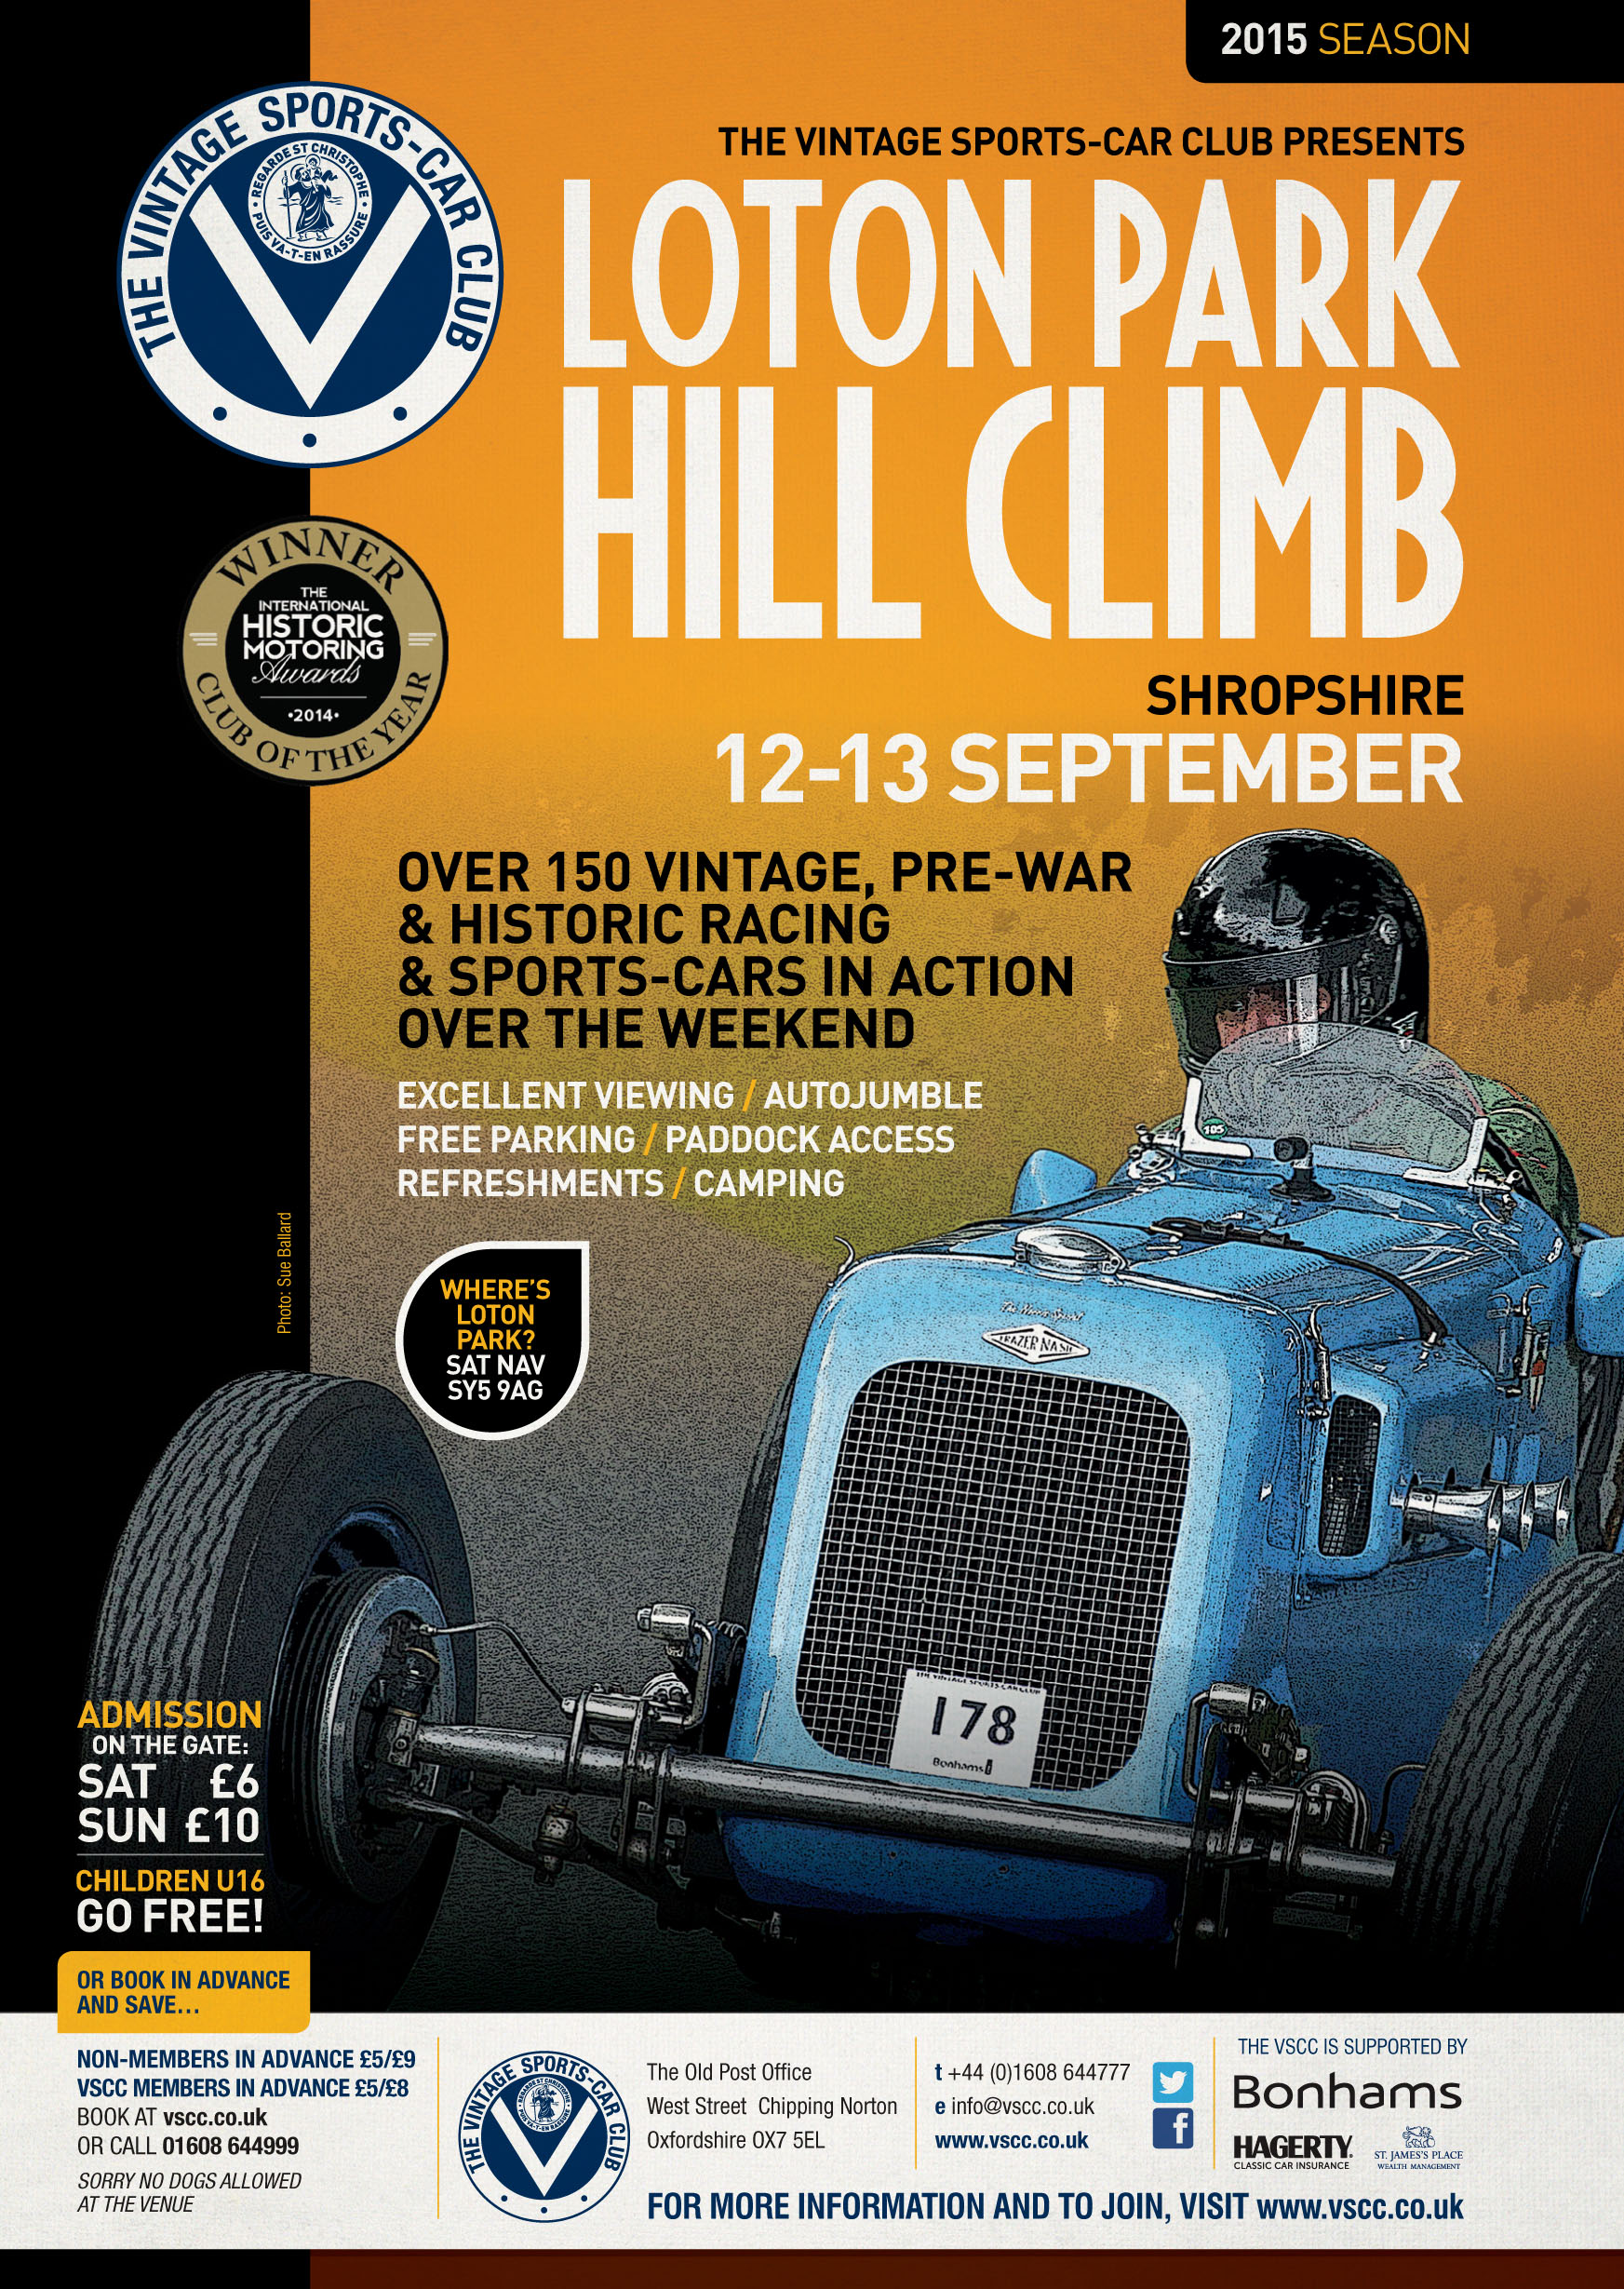 A Record turnout for VSCC Hill Climb Season Finale at Loton Park this Weekend cover